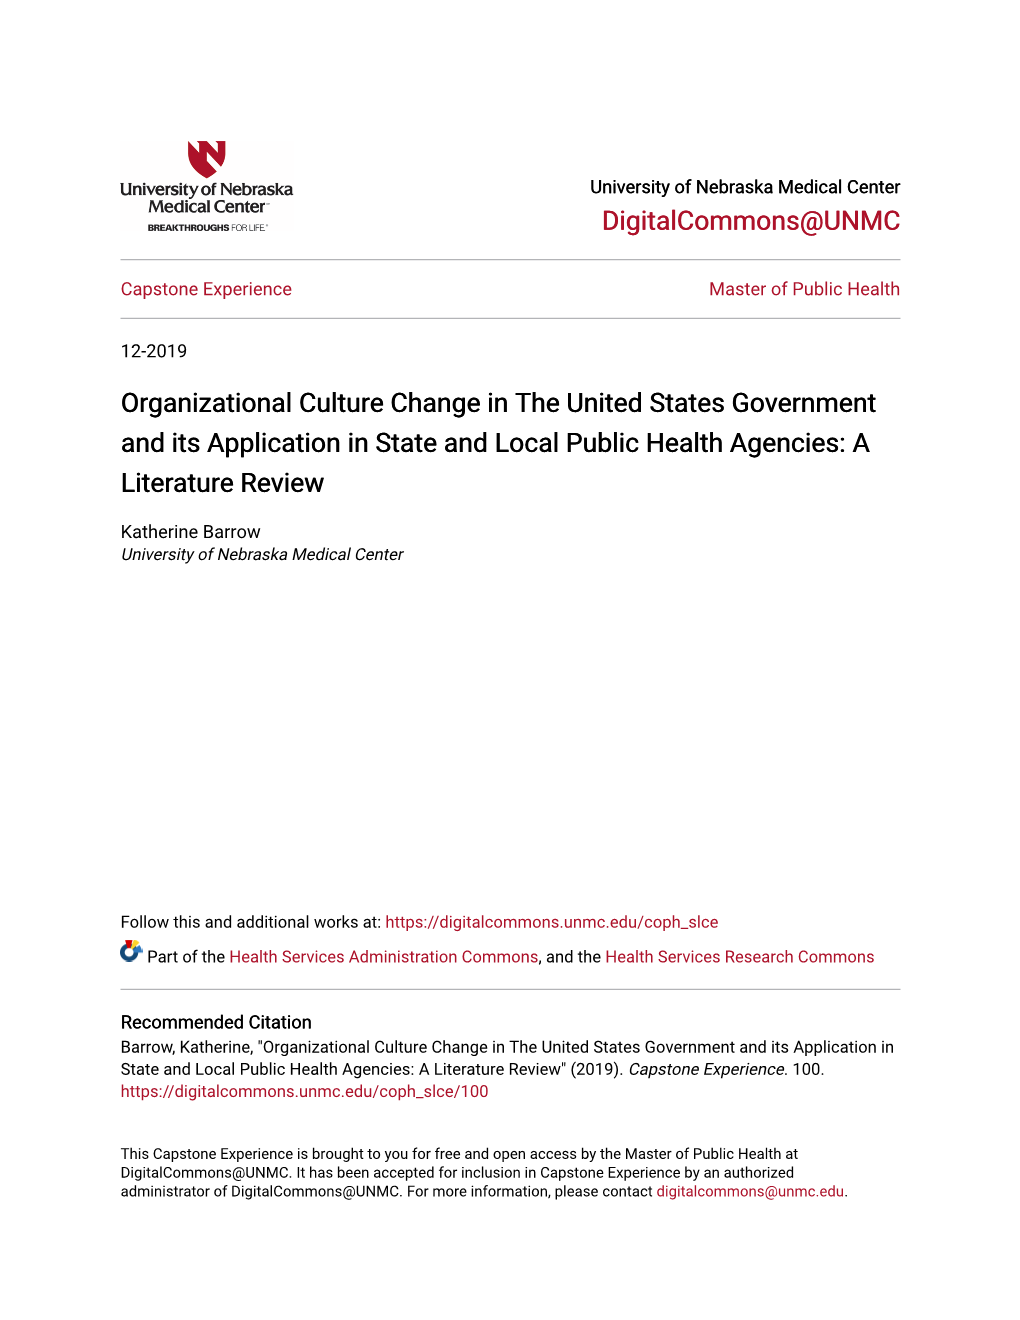 Organizational Culture Change in the United States Government and Its Application in State and Local Public Health Agencies: a Literature Review